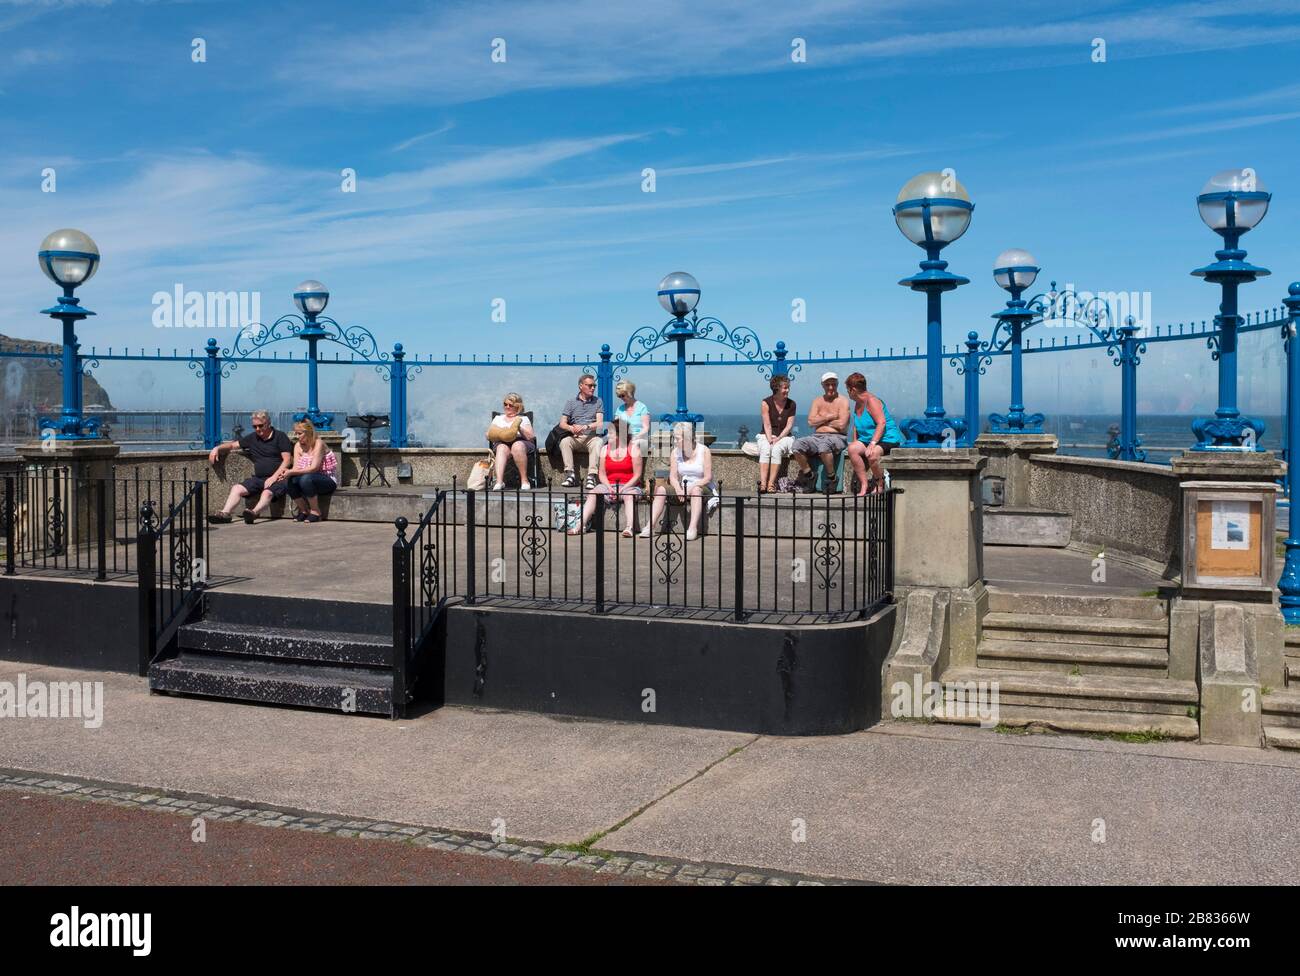 People relaxing in sunshine on the bandstand on the promenade at Llandudno, Conwy, Wales, Uk Stock Photo